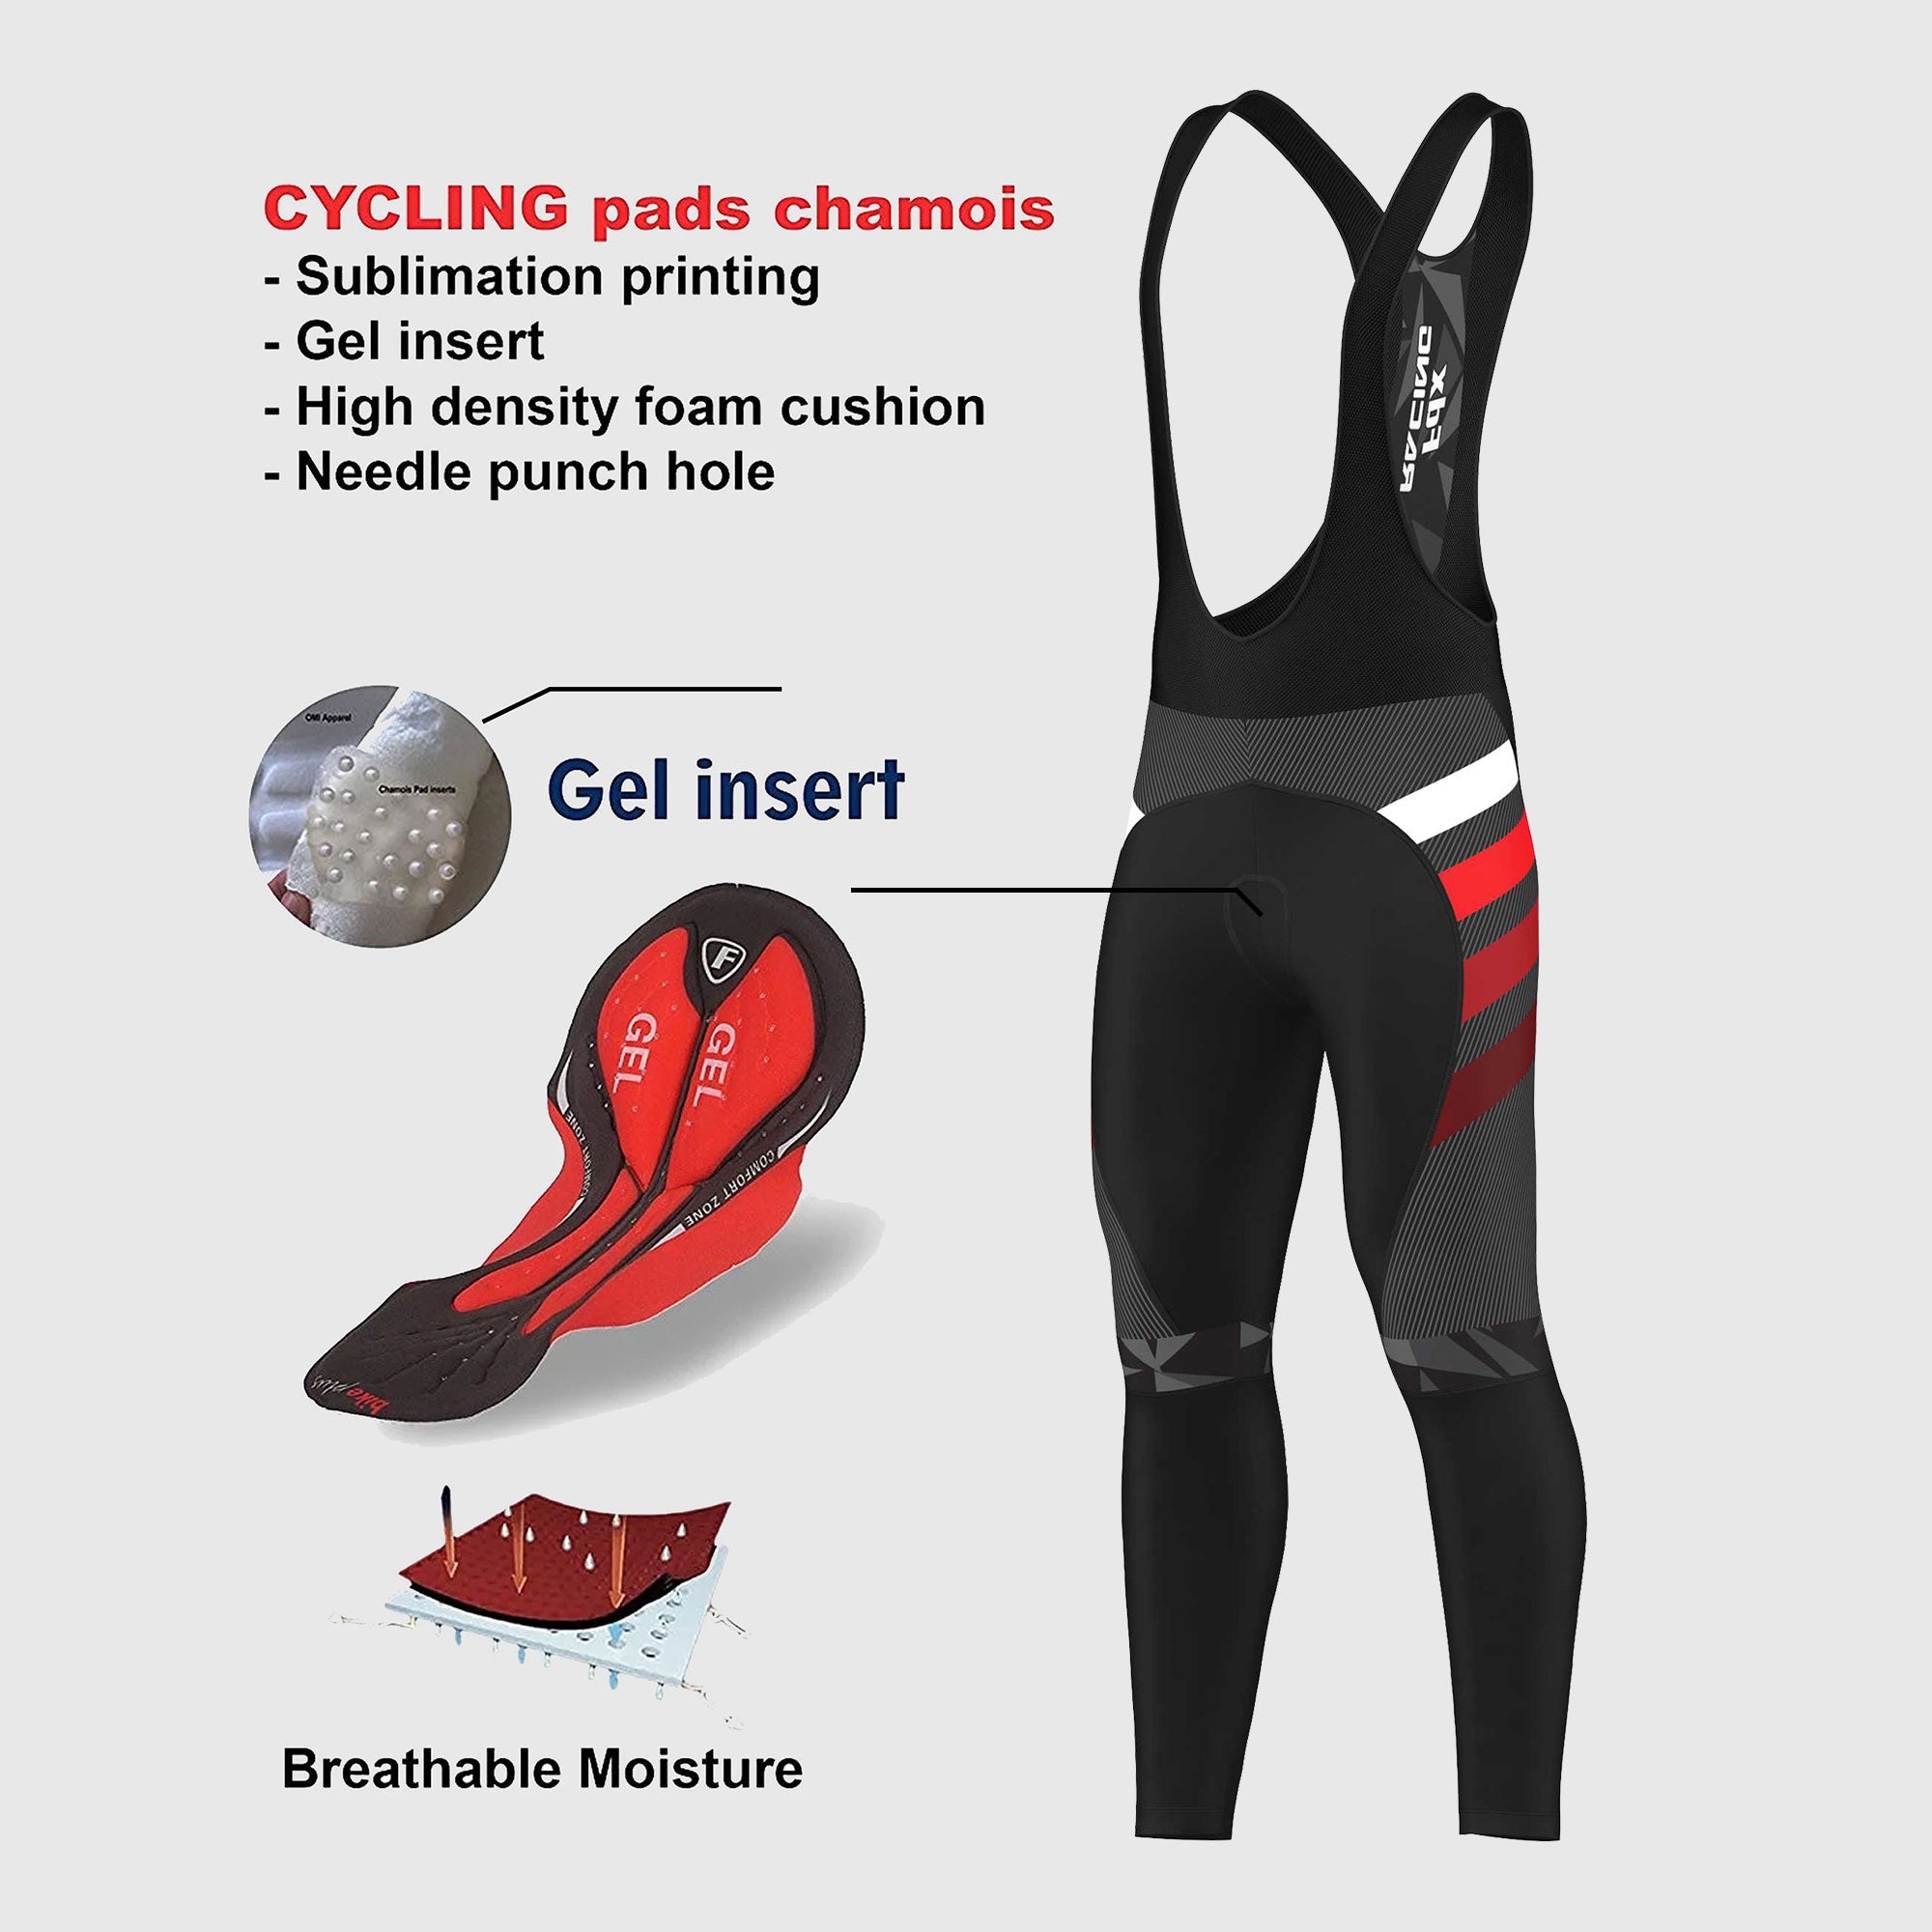 FDX Men's Cycling Tights, Lightweight, Breathable, 3D Padded